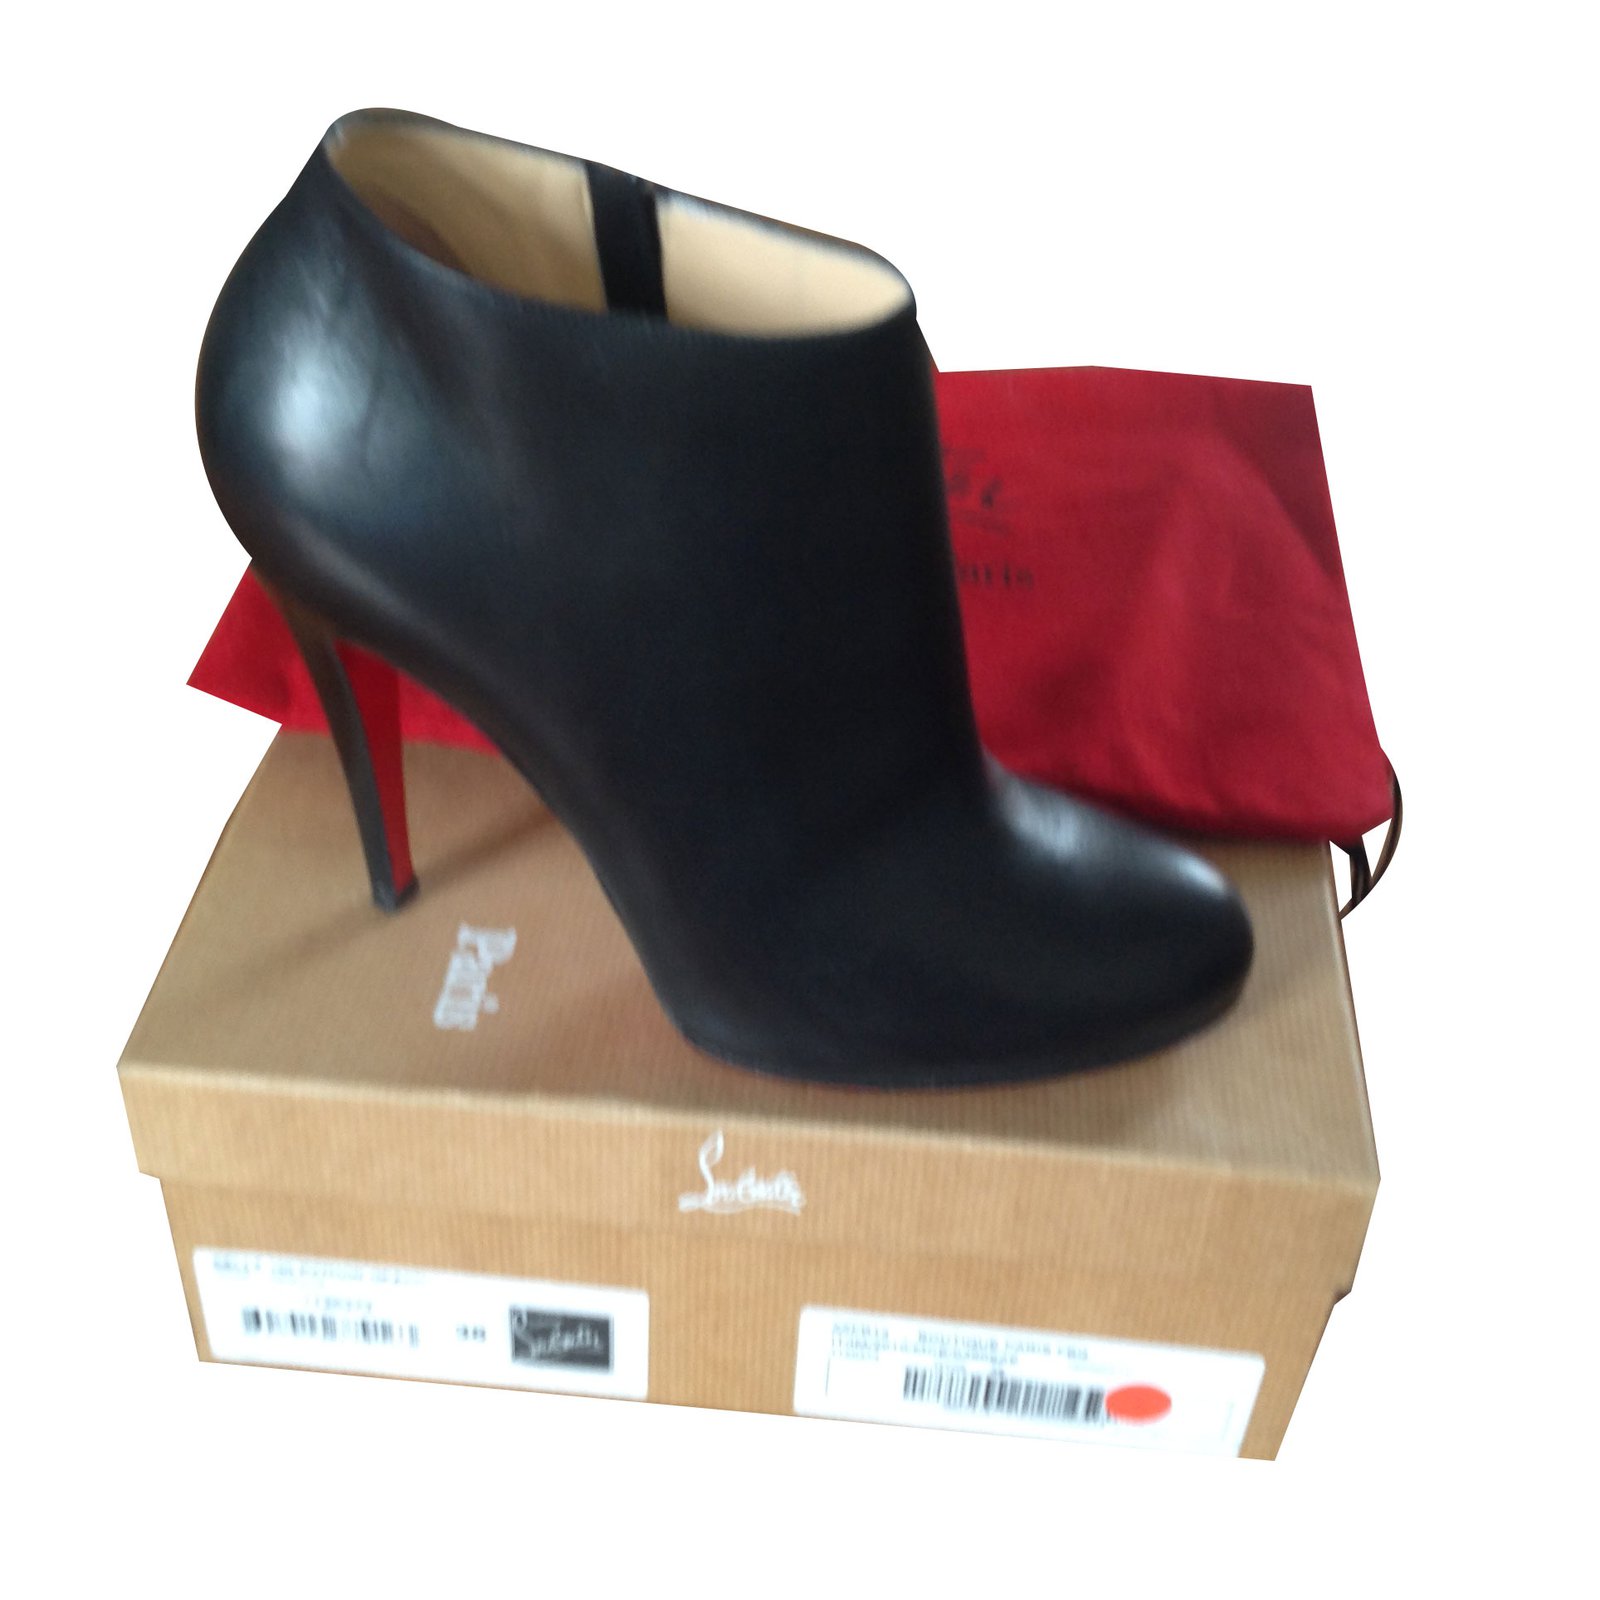 Christian Louboutin Ankle Boots Belle Black Leather ref.43905